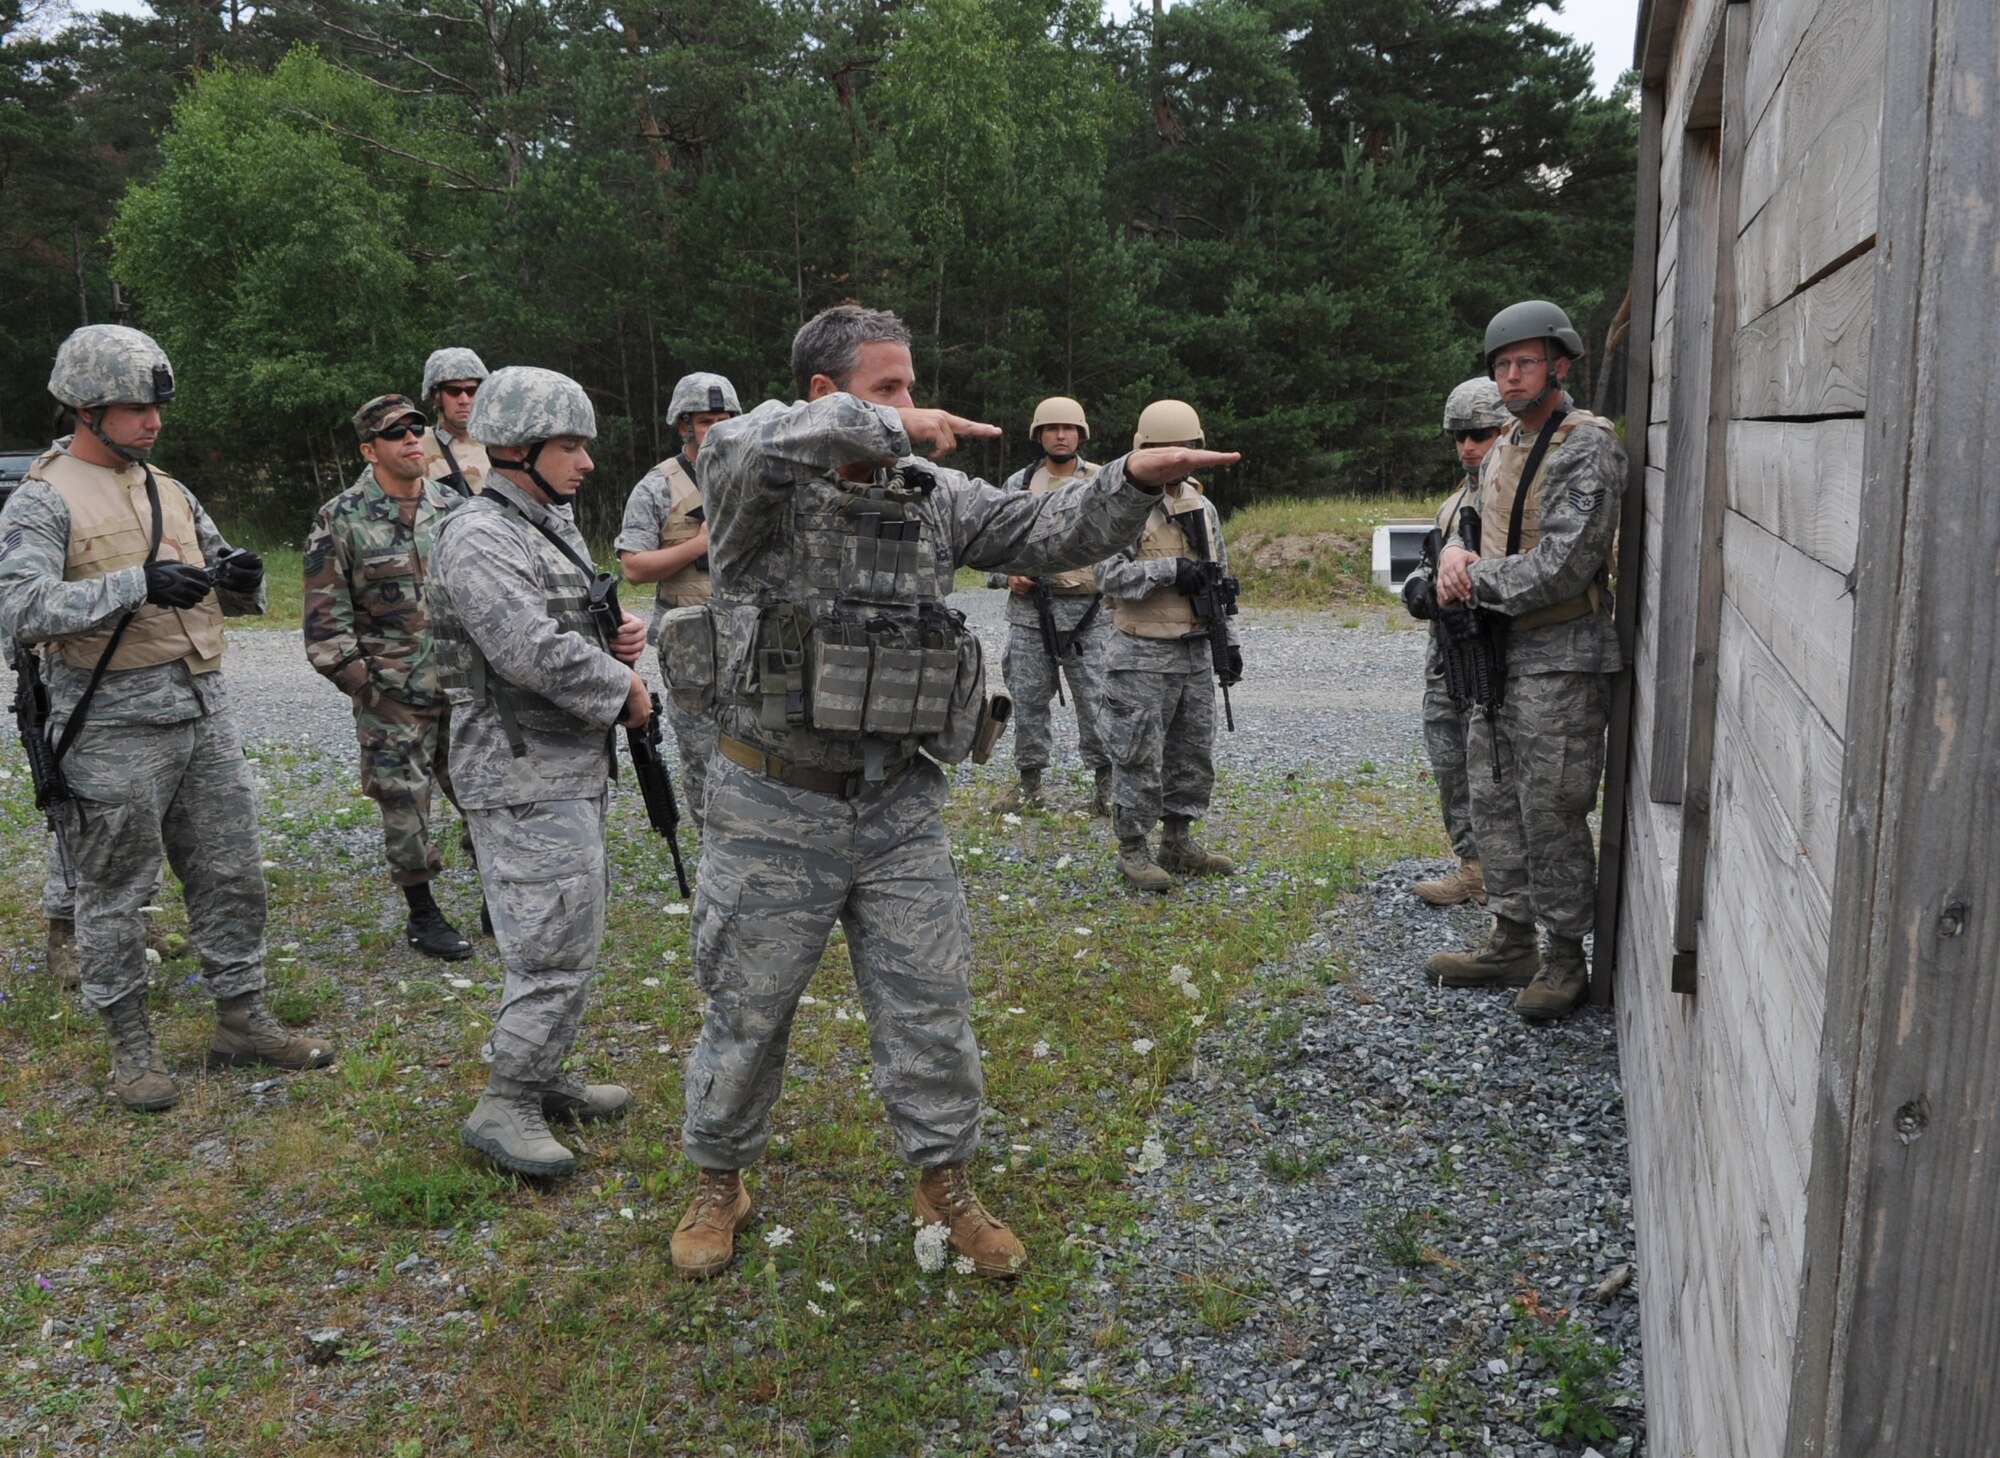 U.S. Air Force Tech. Sgt. Shawn Leonard, 9th Air Support Operations Squadron joint terminal attack controller instructor from Fort Hood, Tx, teaches urban close combat training class during exercise ALLIED STRIKE 10, Grafenwoehr, Germany, July 26, 2010. AS 10 is Europe's premier close air support (CAS) exercise, held annually to conduct robust, realistic CAS training that helps build partnership capacity among allied North Atlantic Treaty Organization nations and joint services while refining the latest operational CAS tactics. For more ALLIED STRIKE information go to www.usafe.af.mil/alliedstrike.asp. (U.S. Air Force photo by Senior Airman Caleb Pierce)